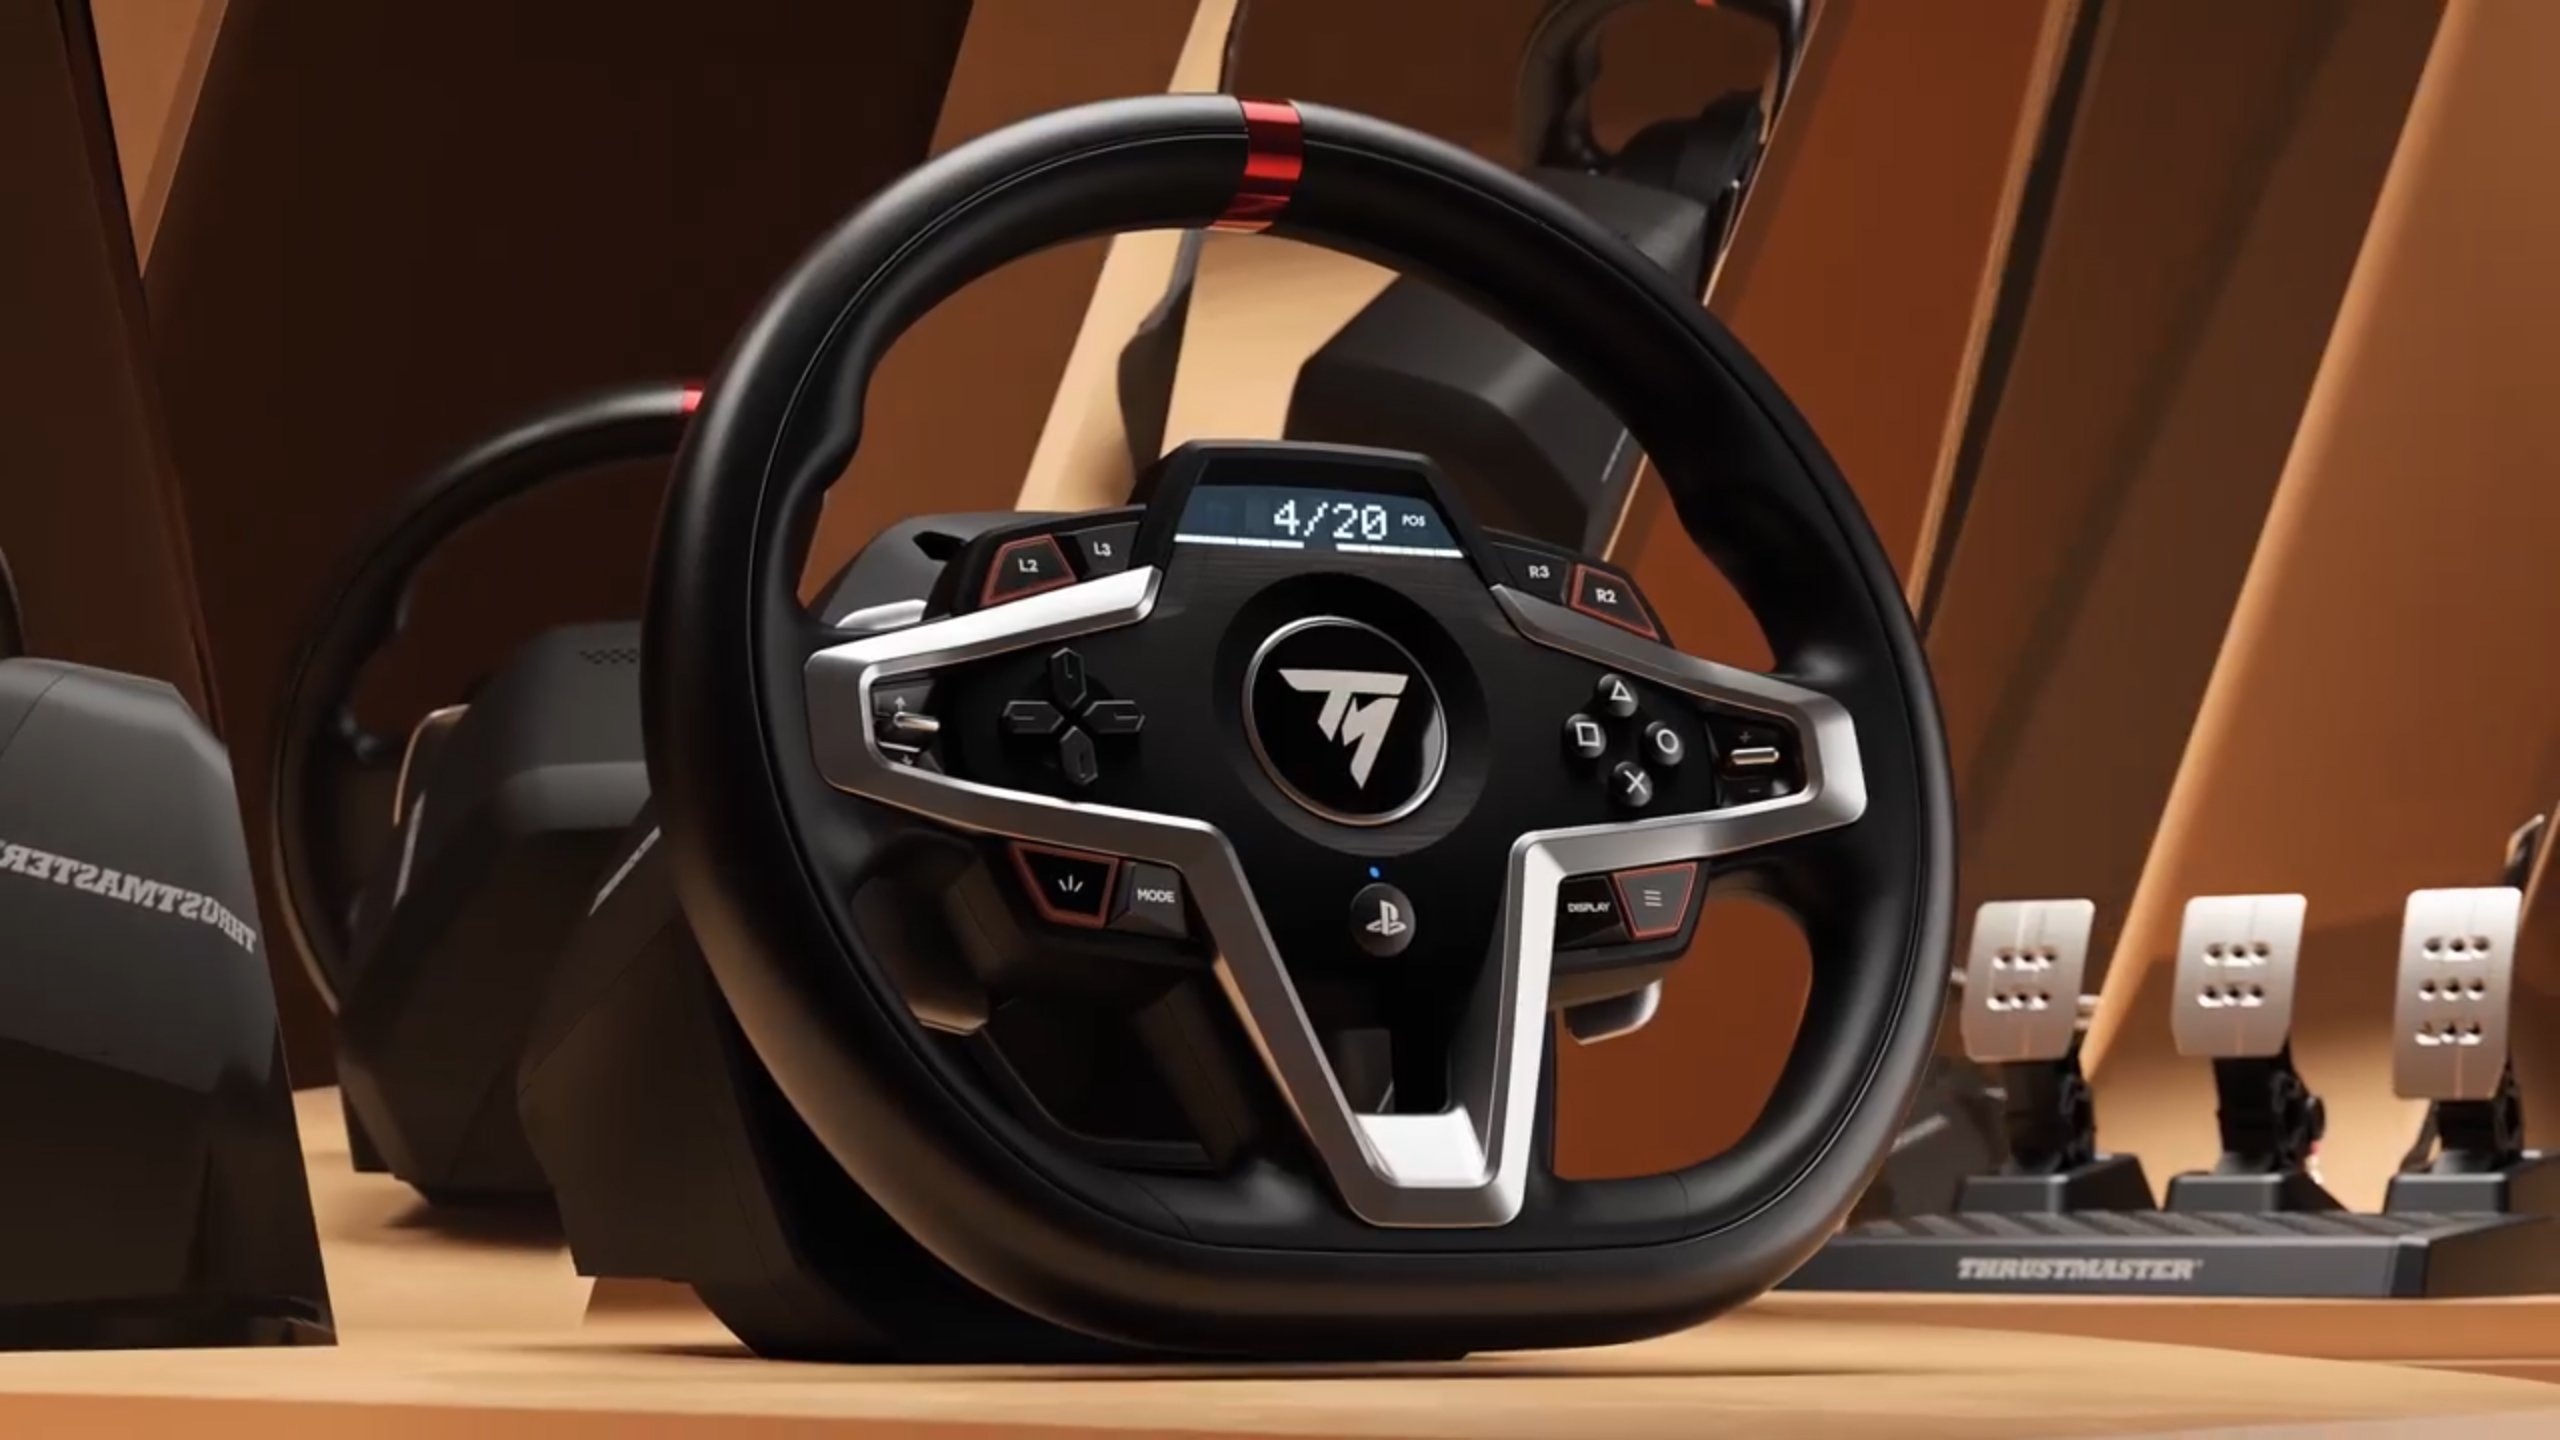 Thrustmaster Officially Reveals T248 Hybrid Drive Wheel for